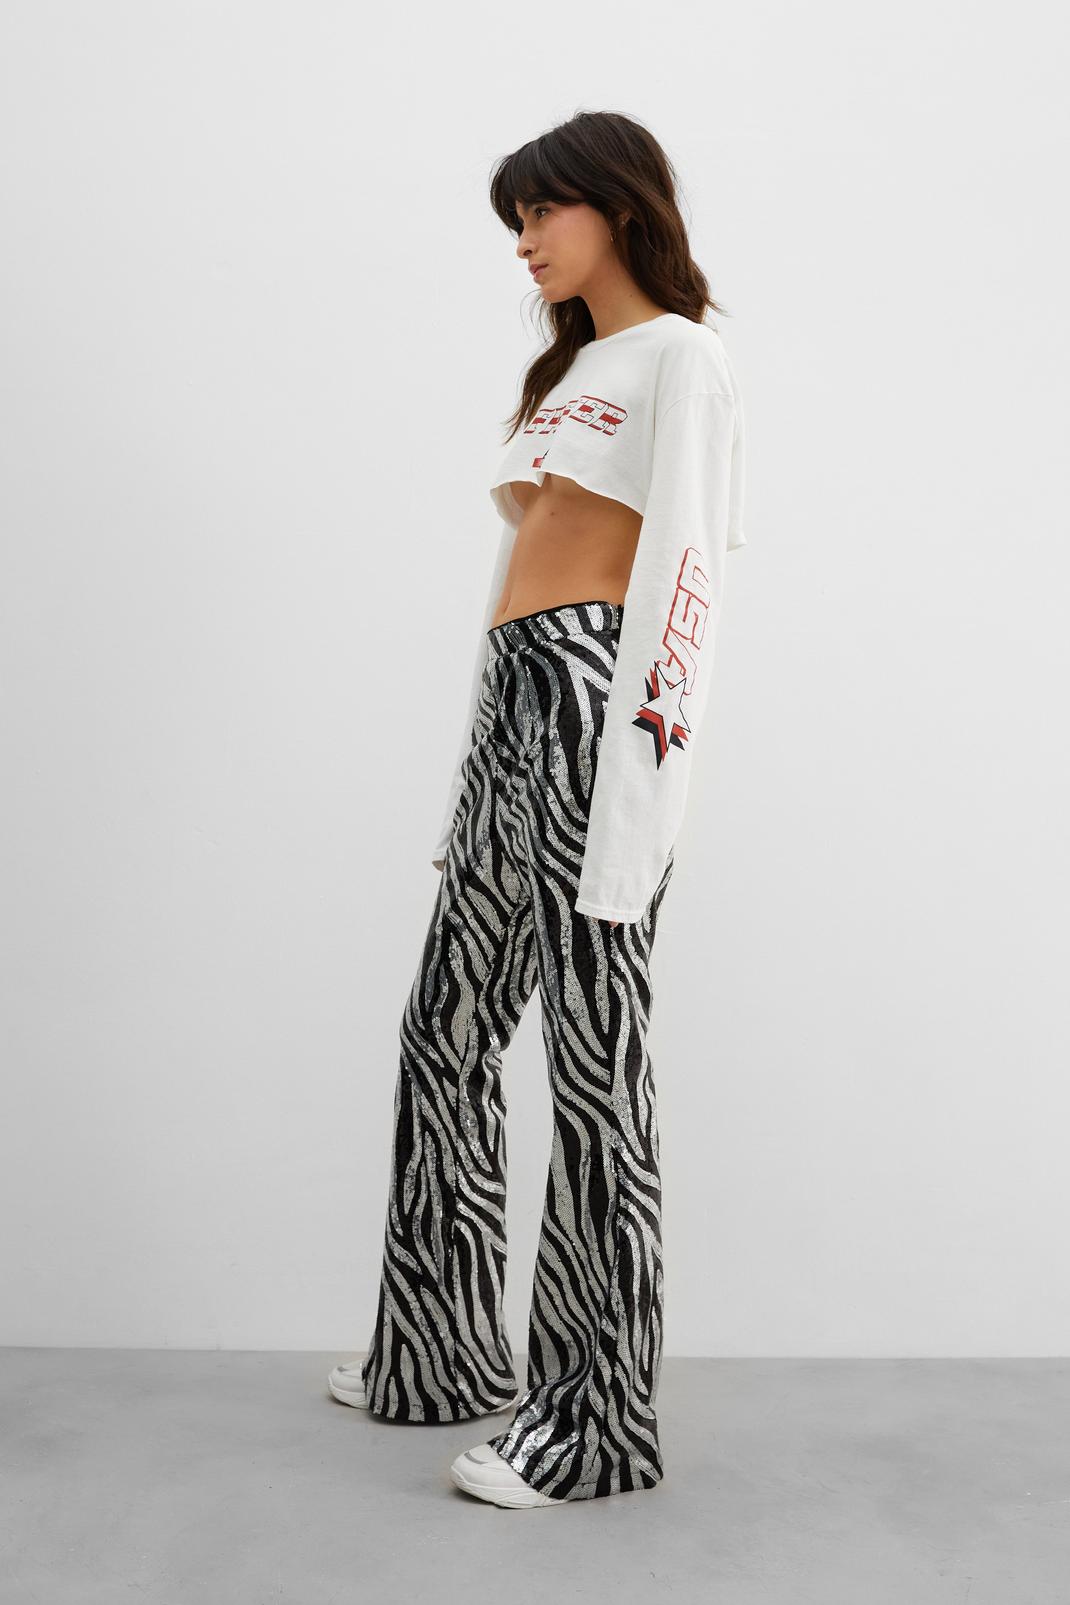 808 Sequin Fit and Flared Zebra Print Pants image number 2